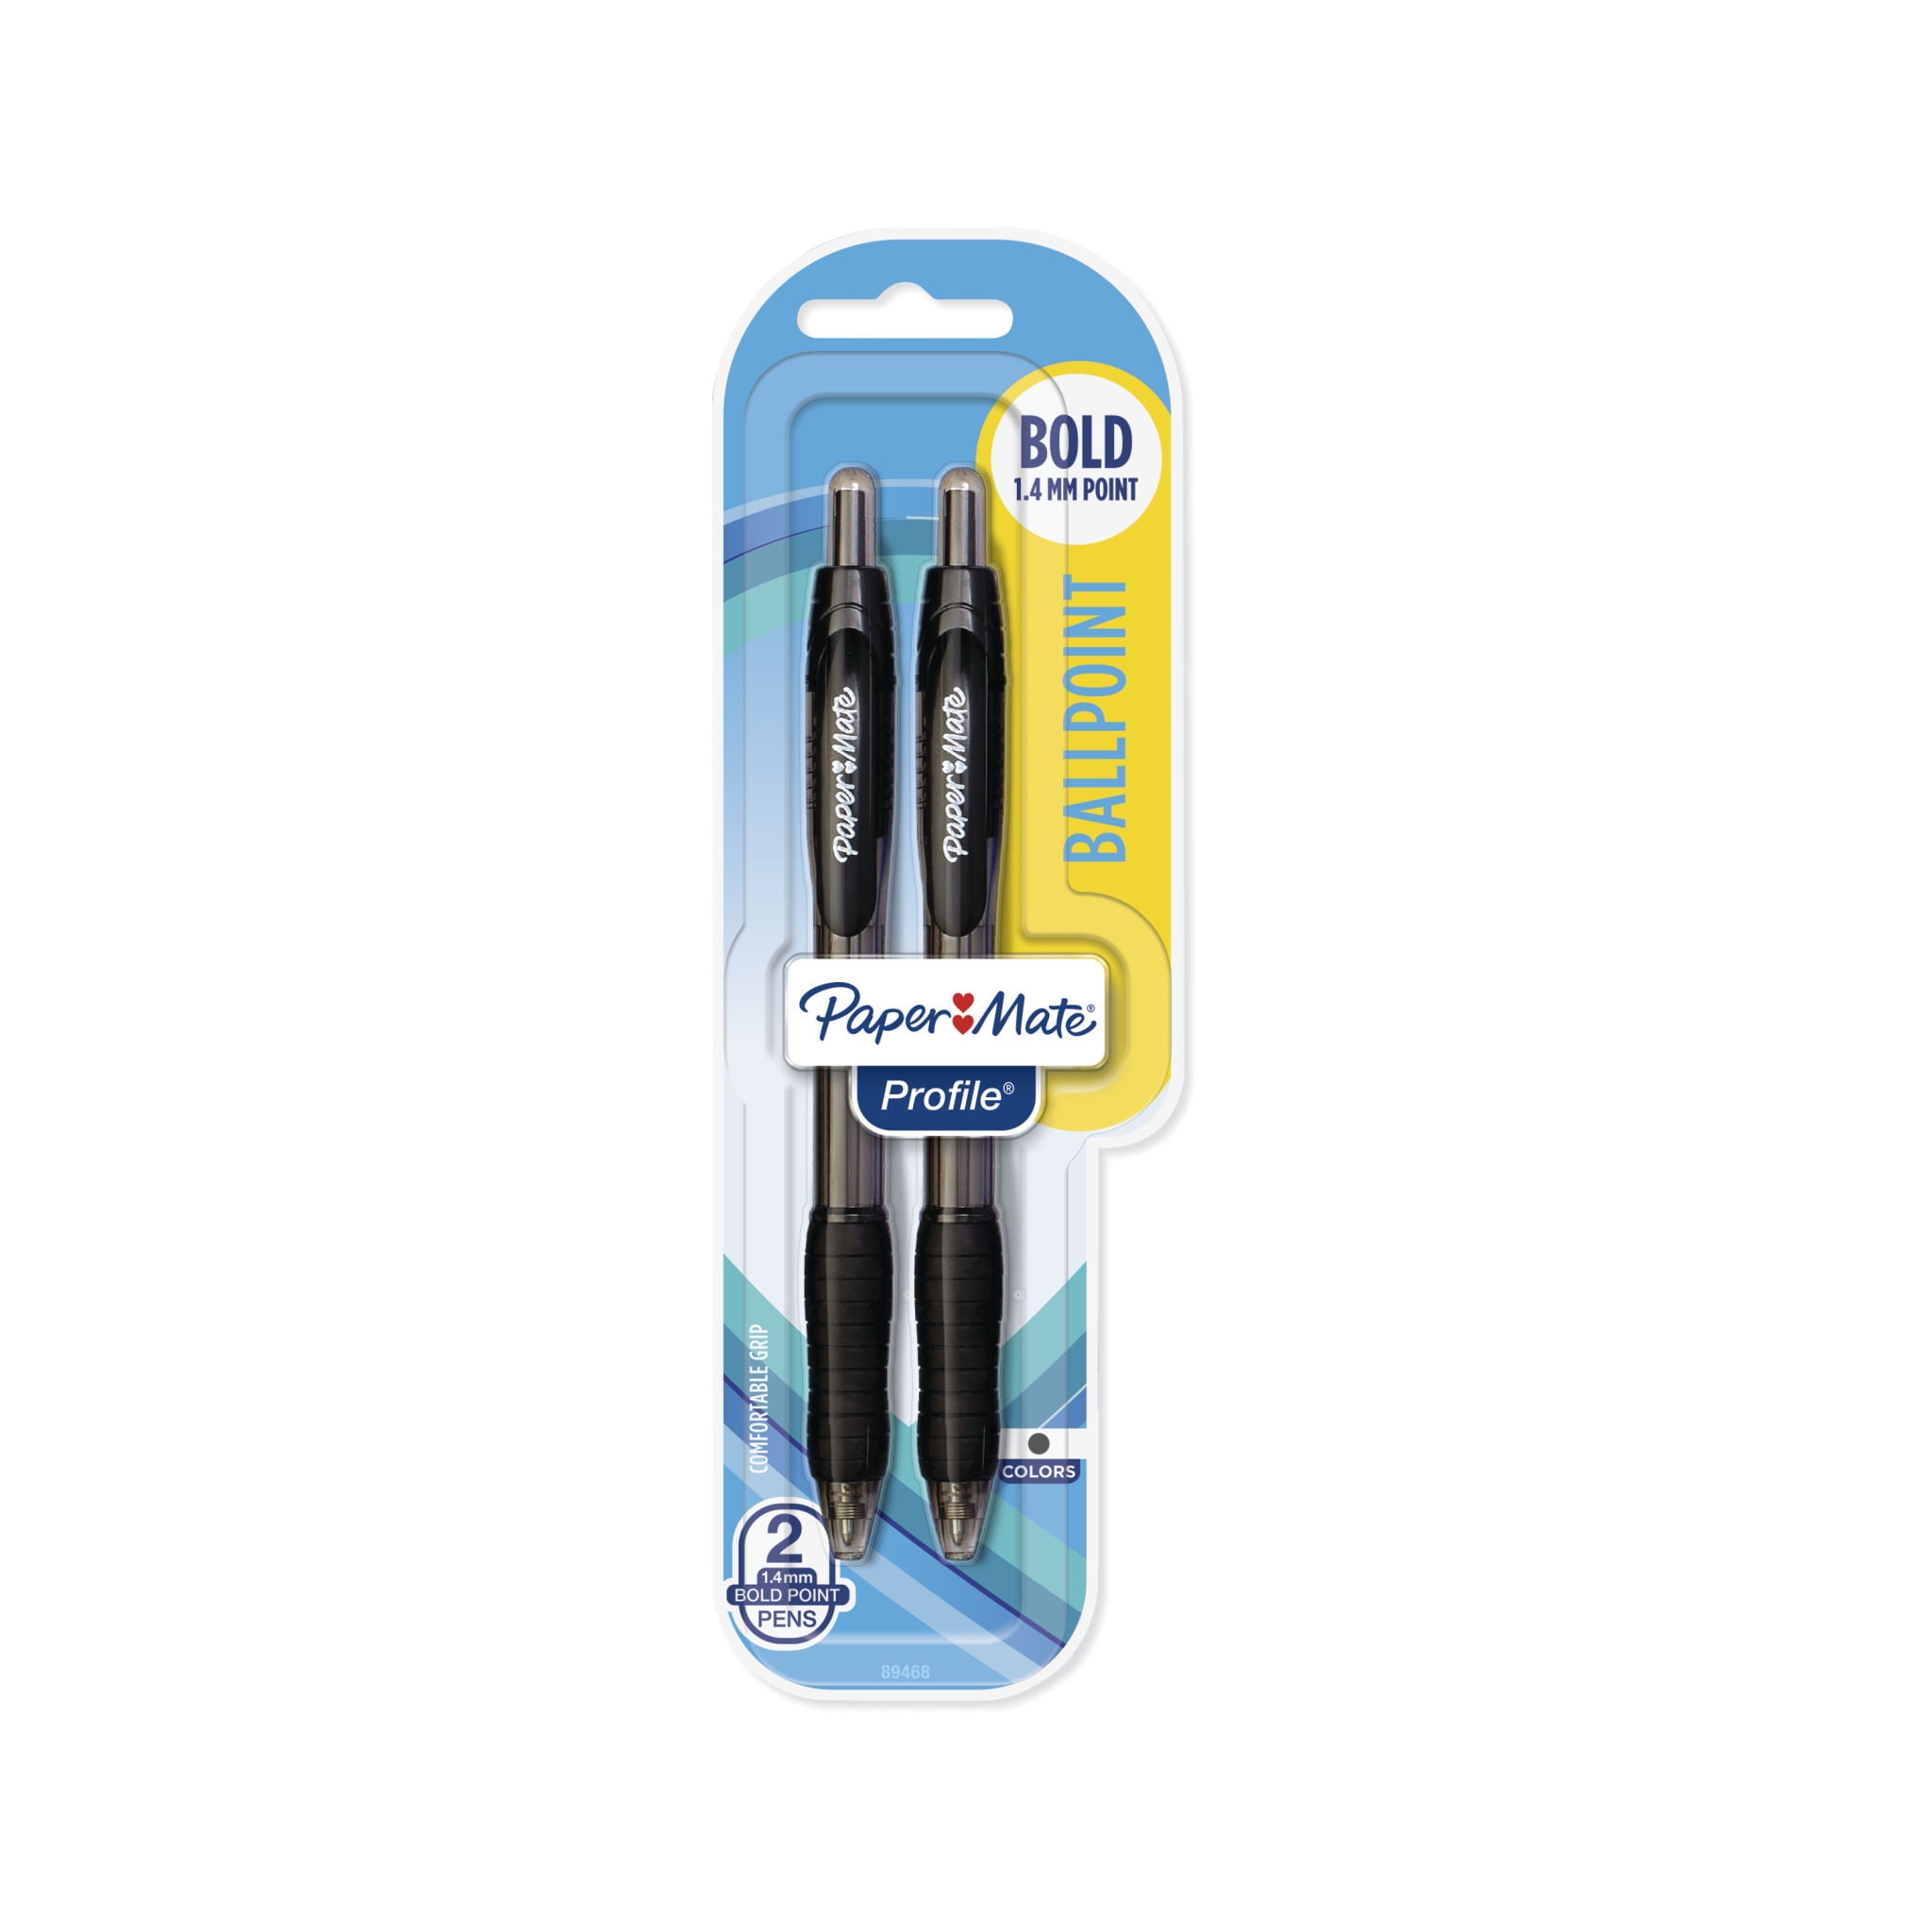 Paper Mate Profile Retractable Ballpoint Pens, 1.4 mm Bold Point, Assorted  Colors, 8 Count